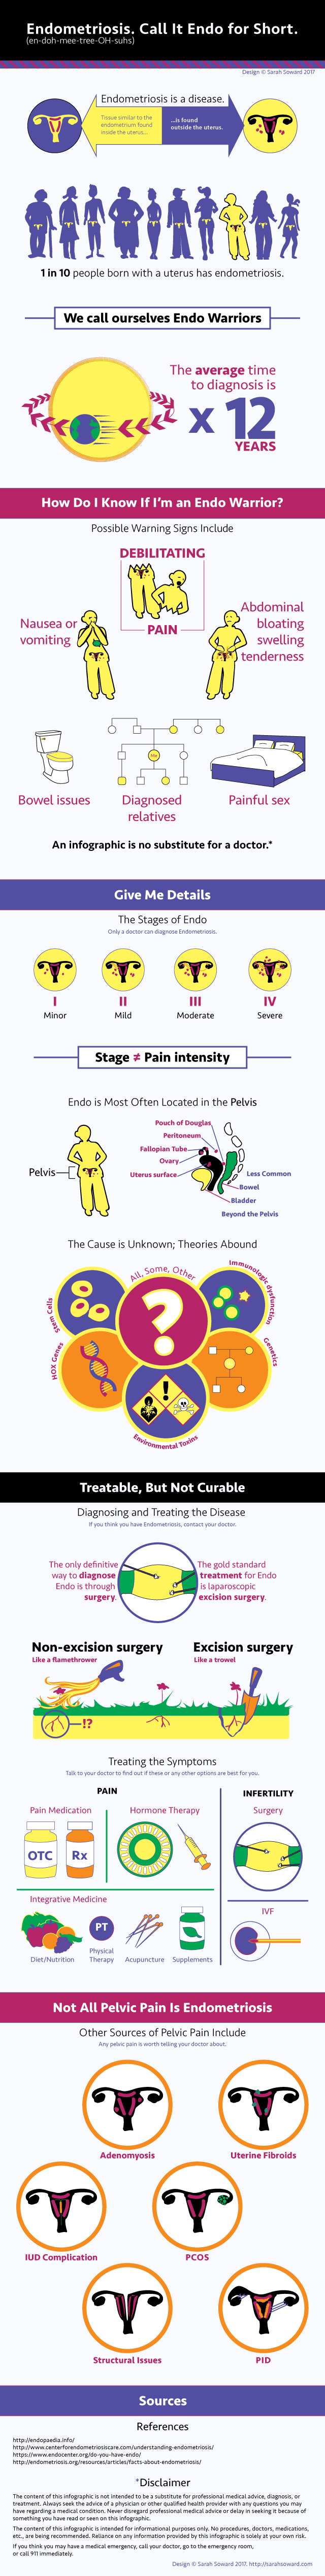 Infographic about endometriosis